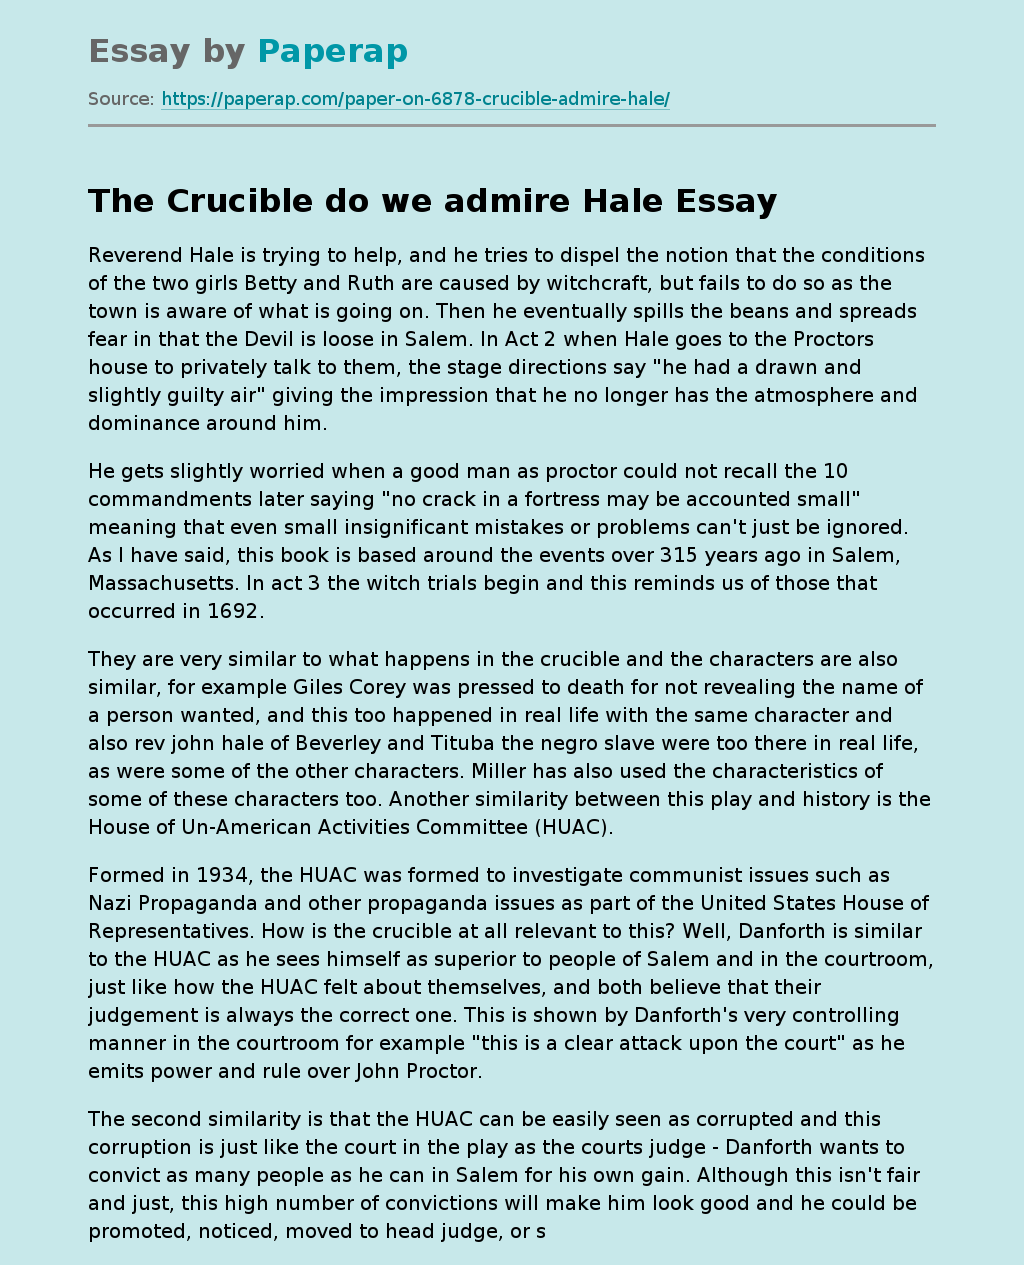 The Crucible do we admire Hale